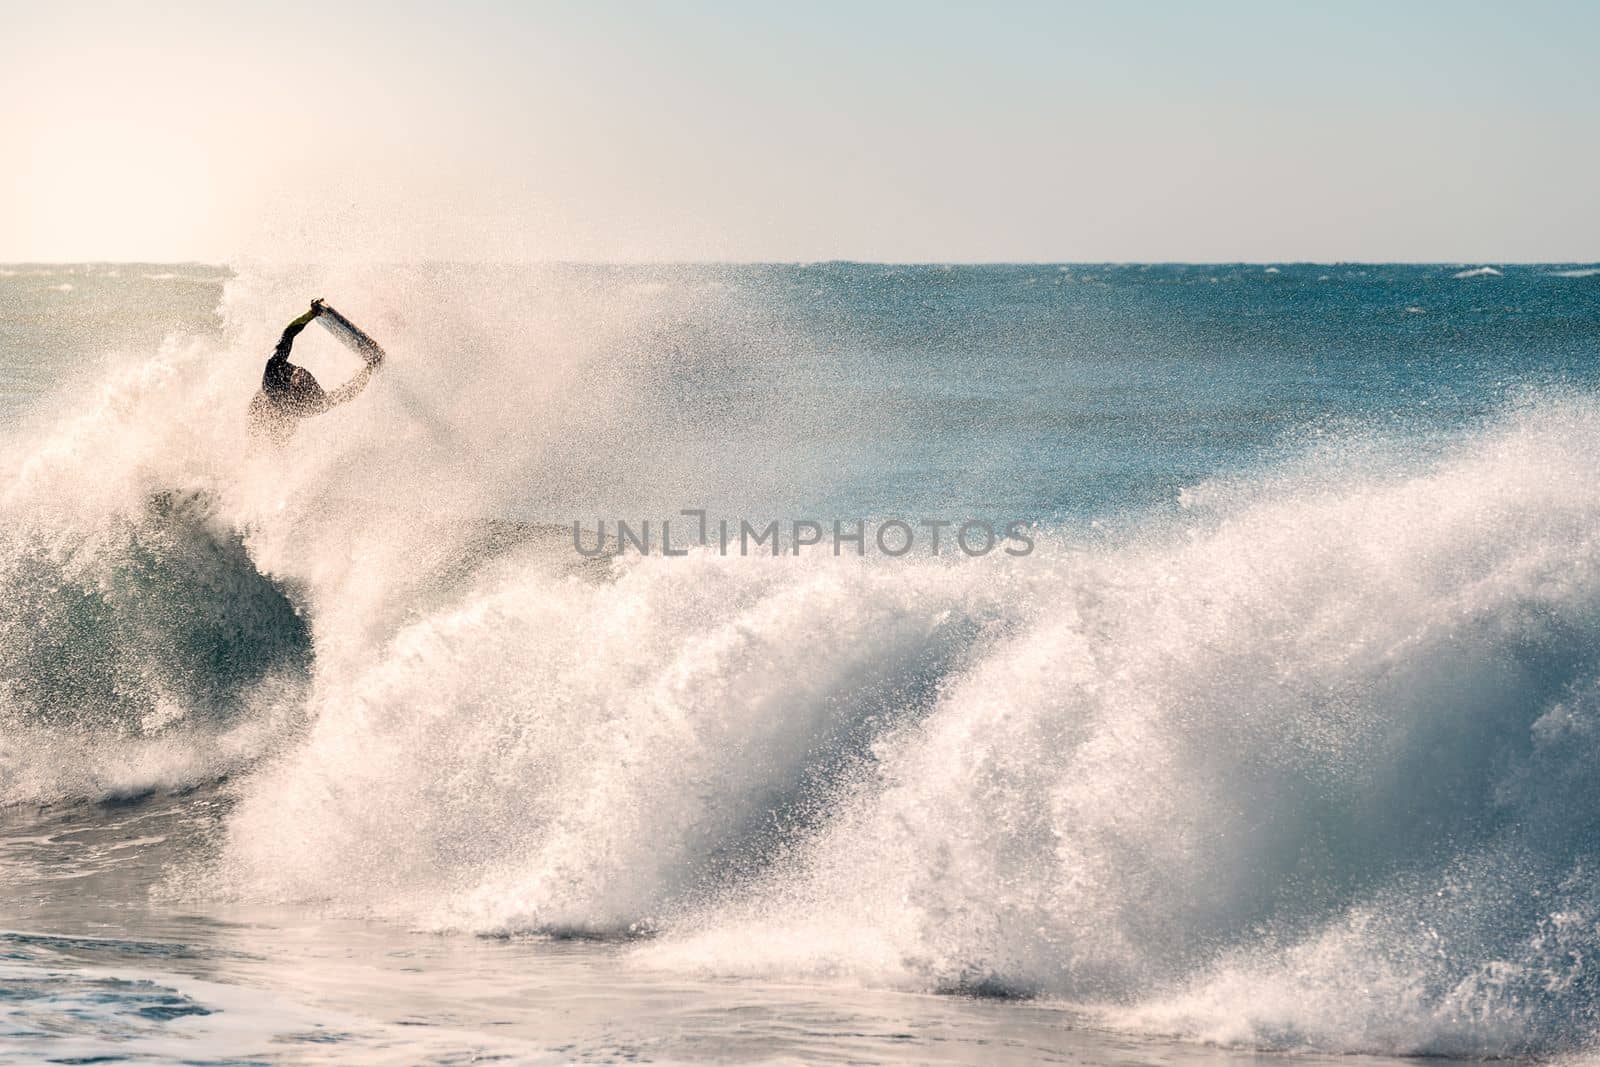 man surfing jumps a great wave that breaks with a lot of power and energy, the sunlight reflects golden on the turquoise surface of the sea and in the plumes of water that the wind raises